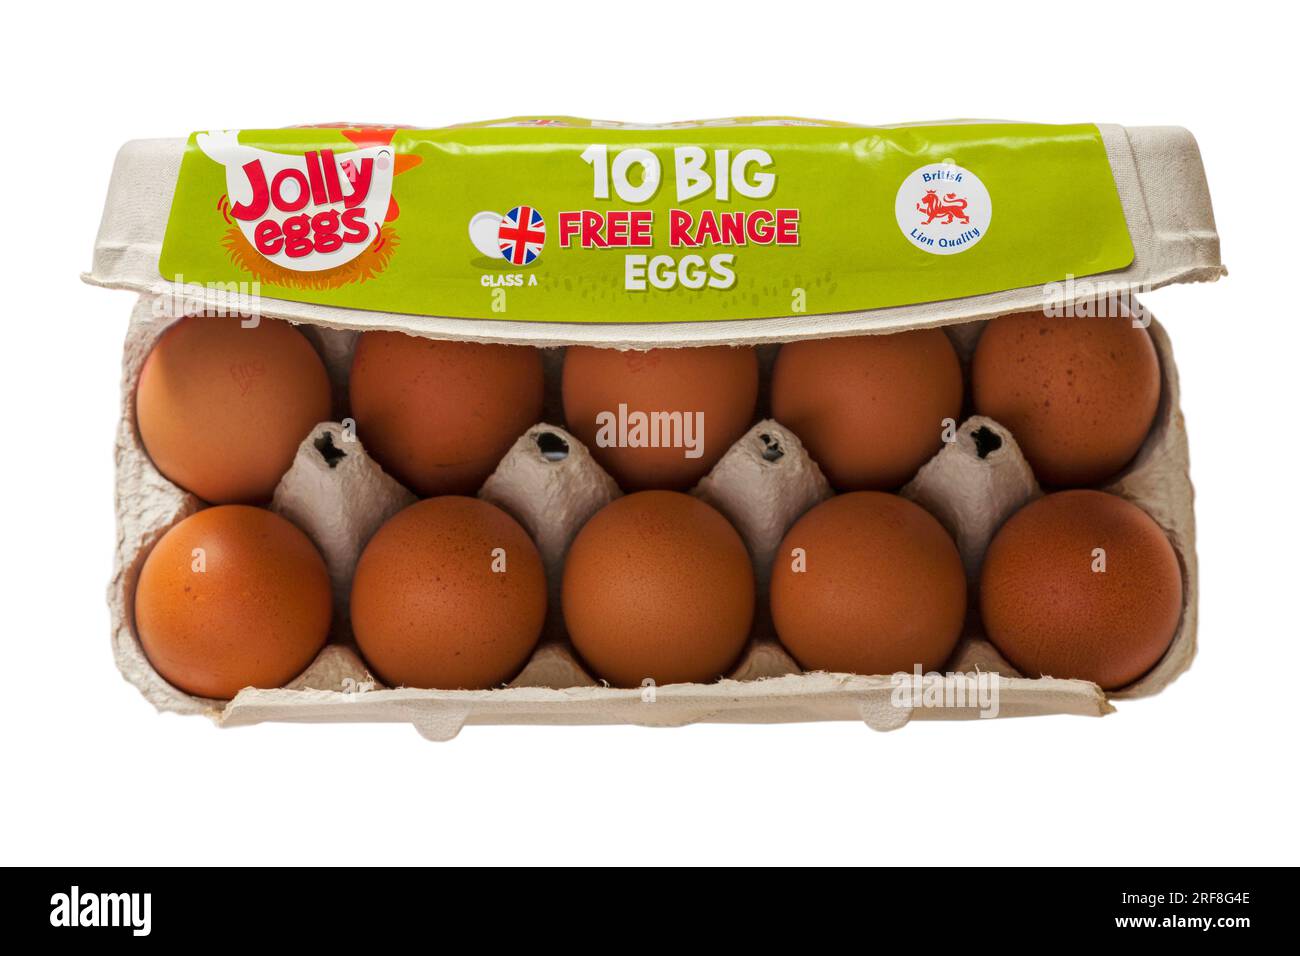 Carton of Jolly Eggs 10 Big Free Range Eggs class A British Lion Quality with lid up to show contents isolated on white background Stock Photo